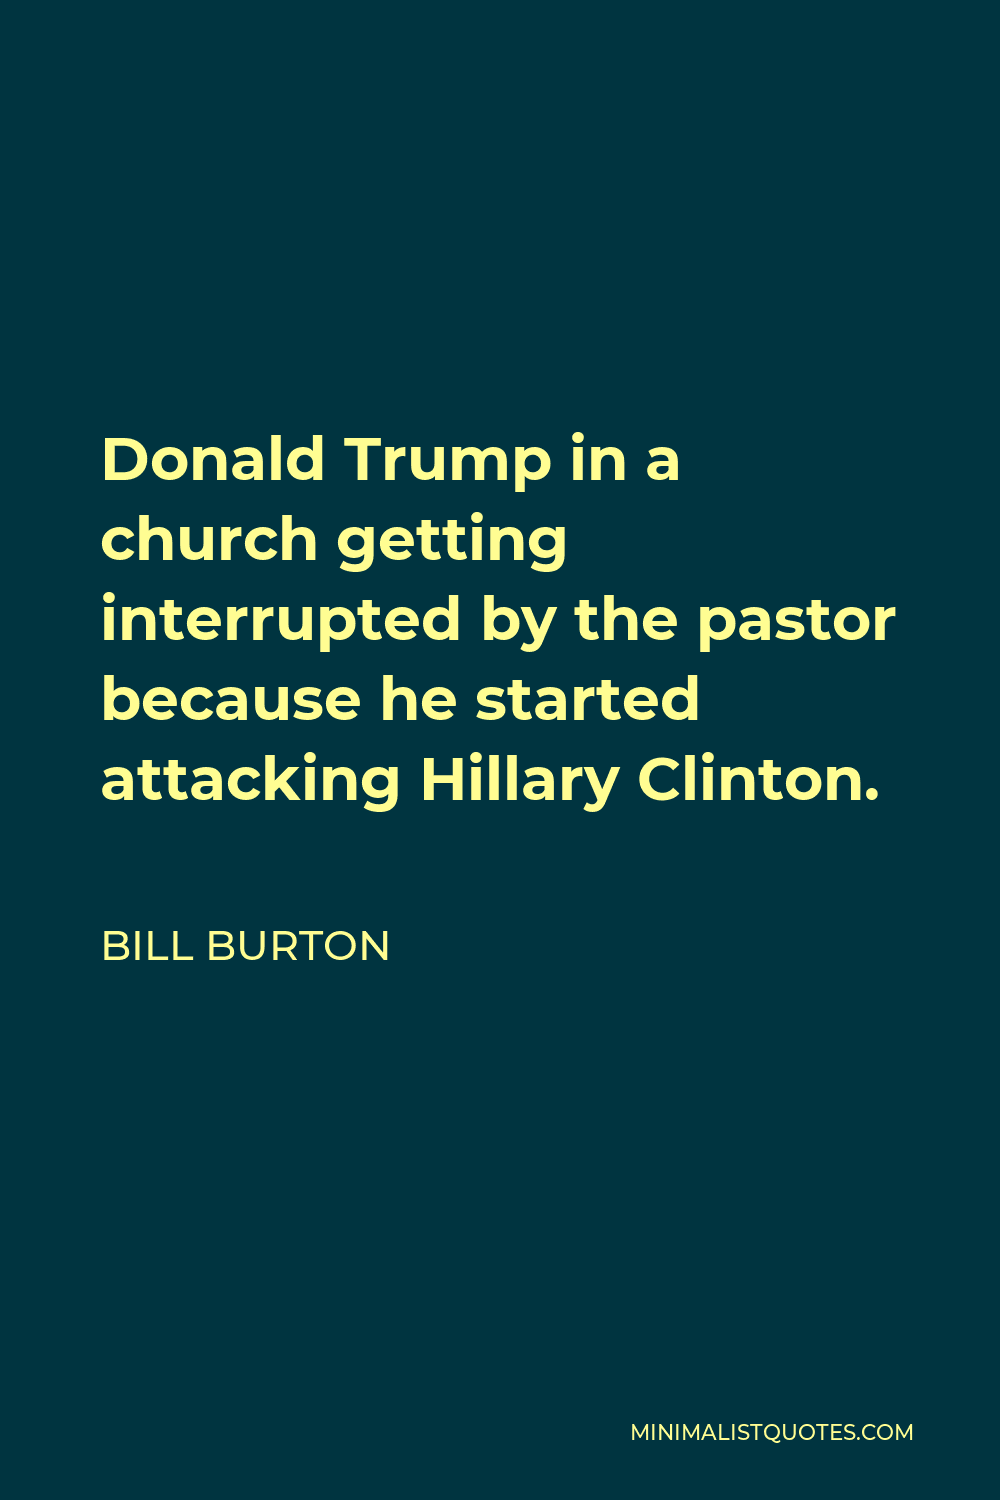 Bill Burton Quote - Donald Trump in a church getting interrupted by the pastor because he started attacking Hillary Clinton.